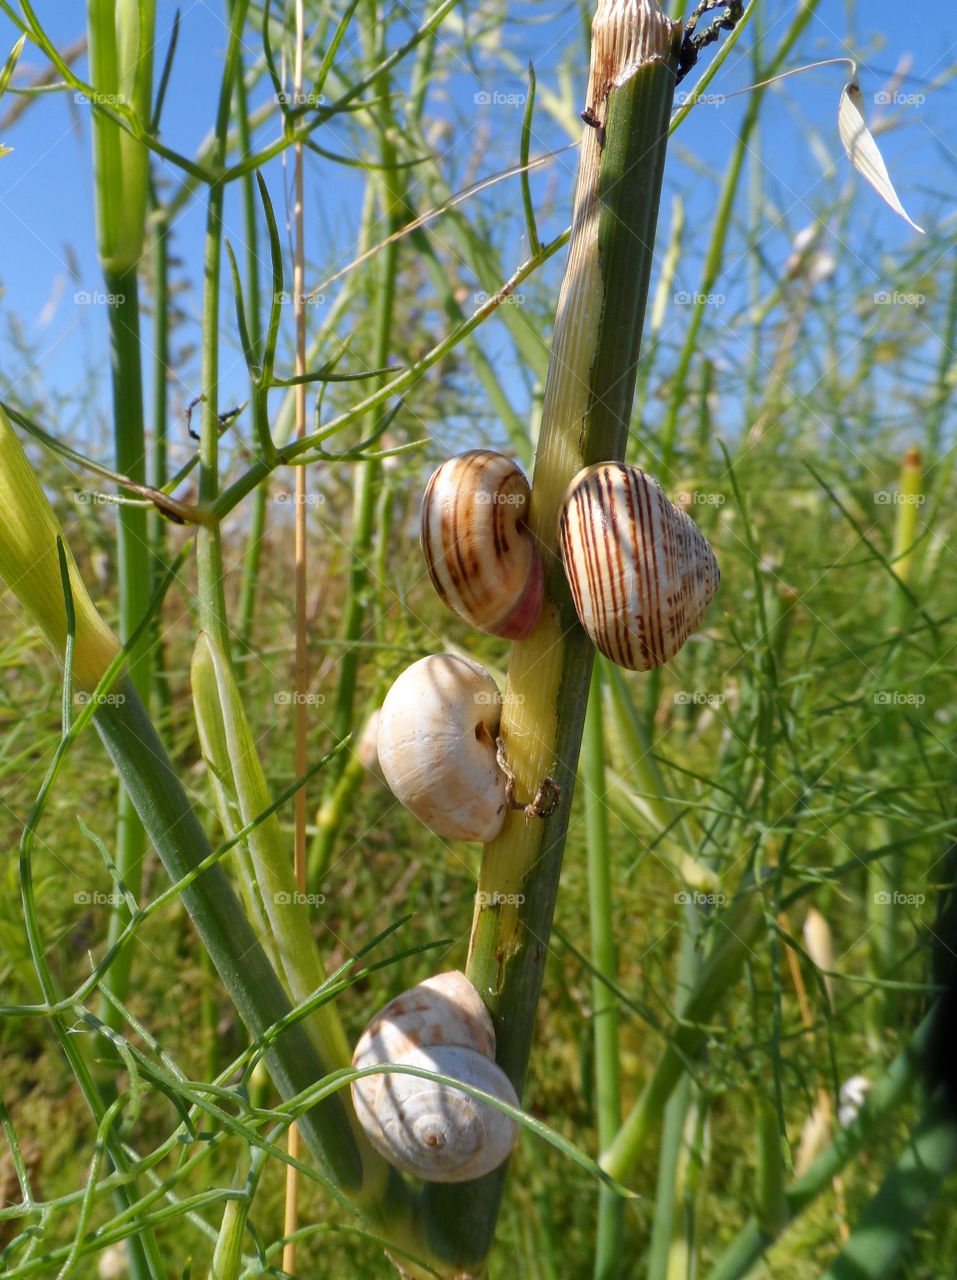 In the heat of the day . Snails searching for shelter